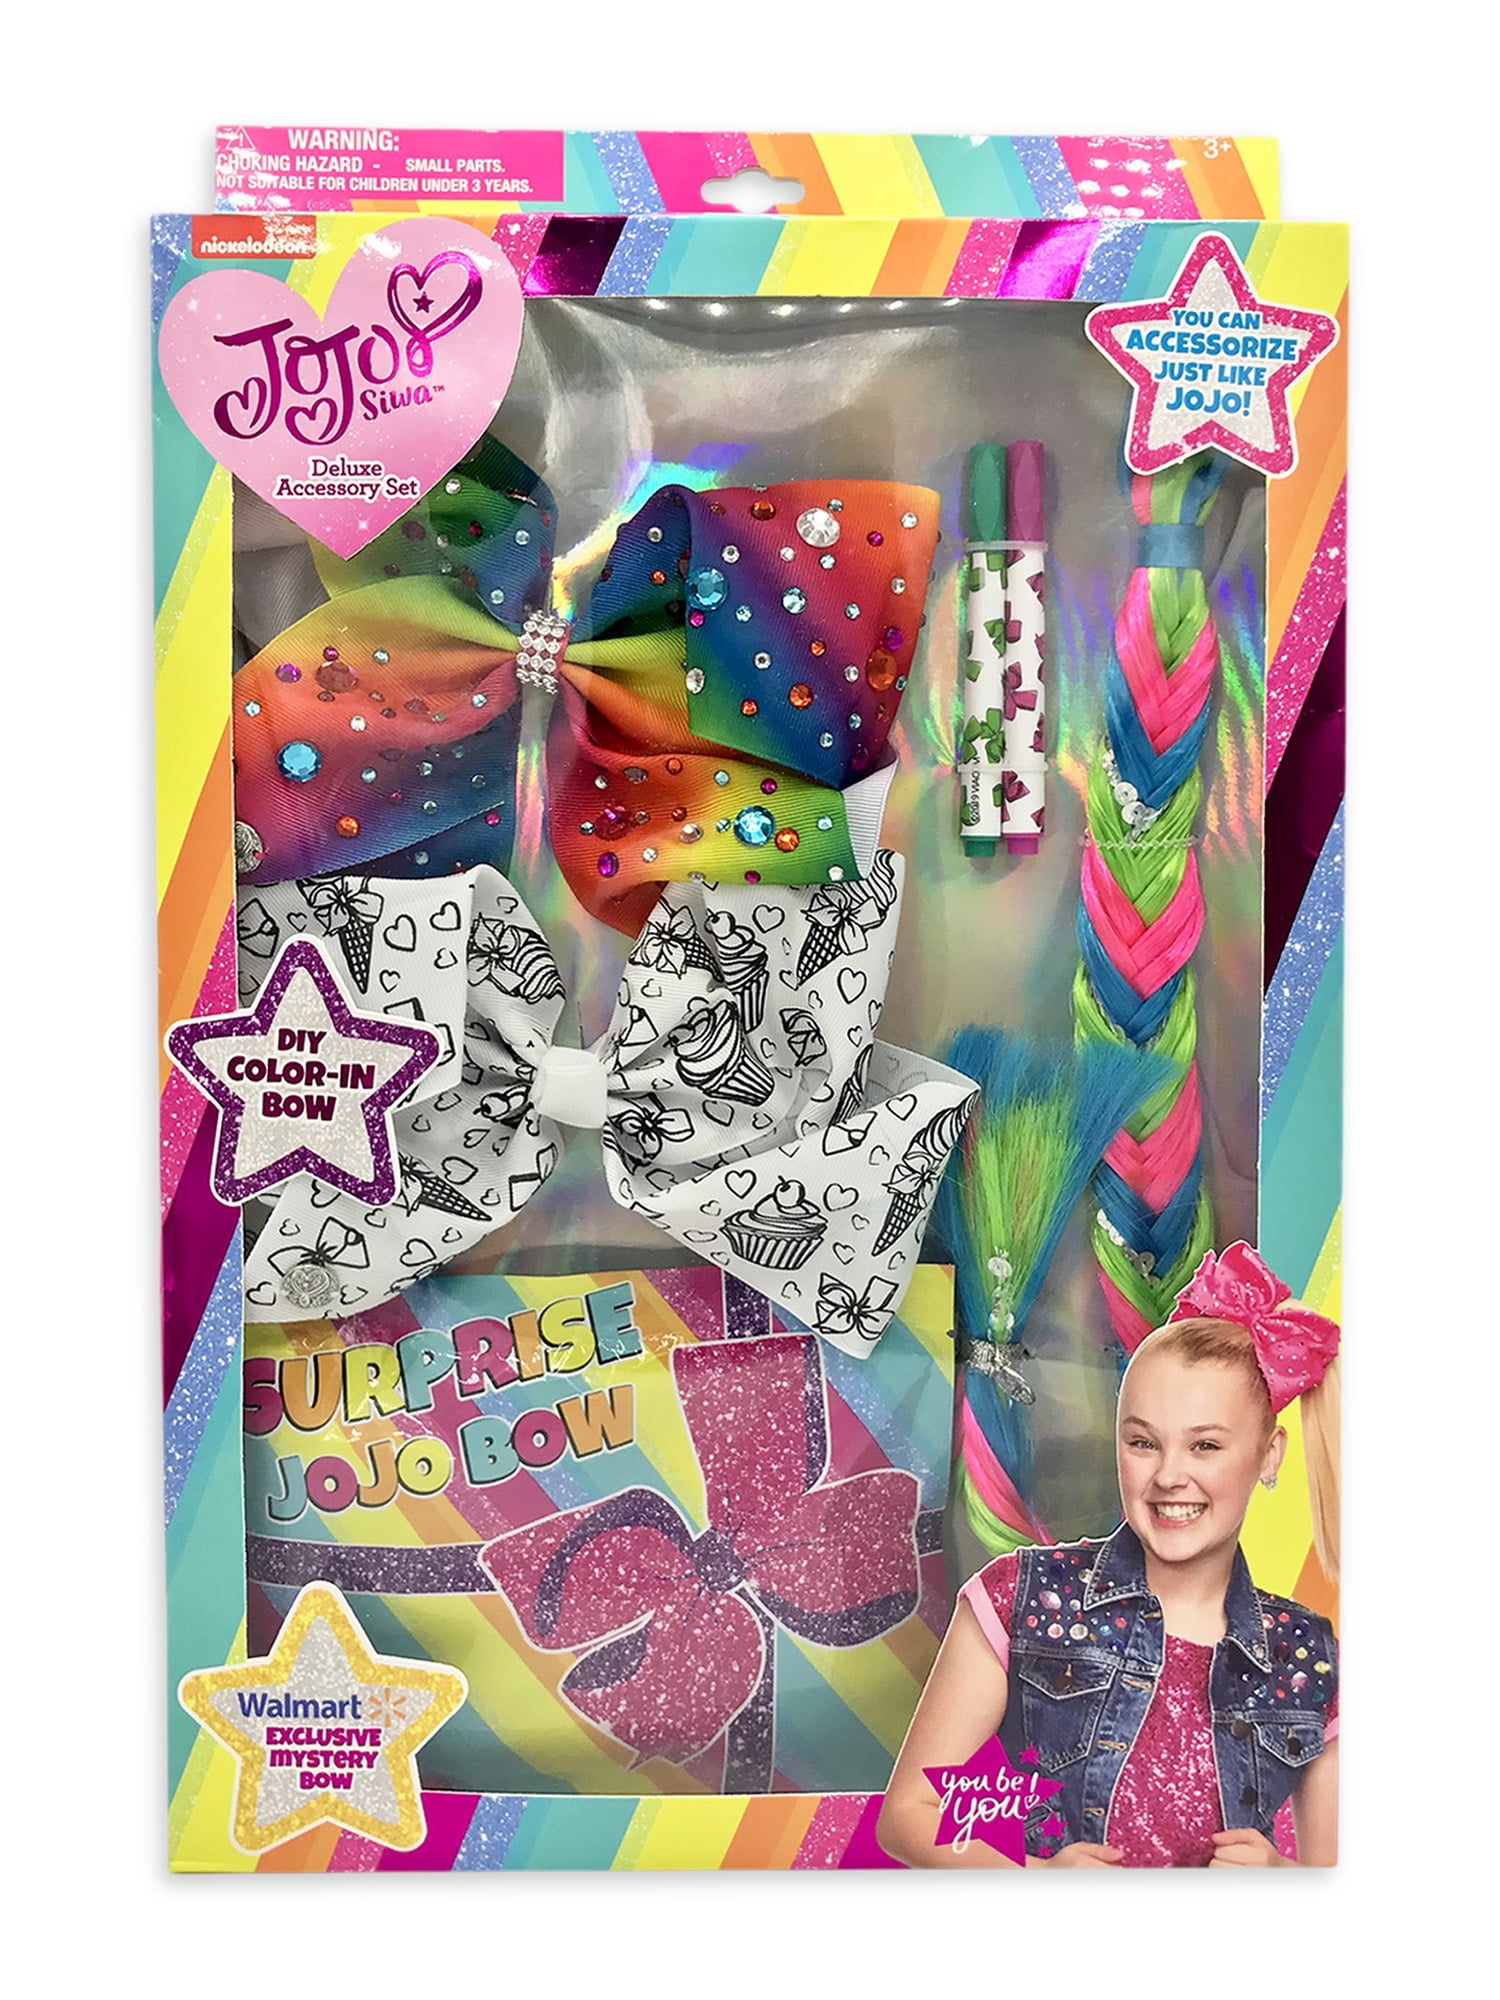 Details about   New 4 Packs JoJo Siwa bag with 2  Mini Mystery Bows Series 4 ~ 2 bows in a Pack 